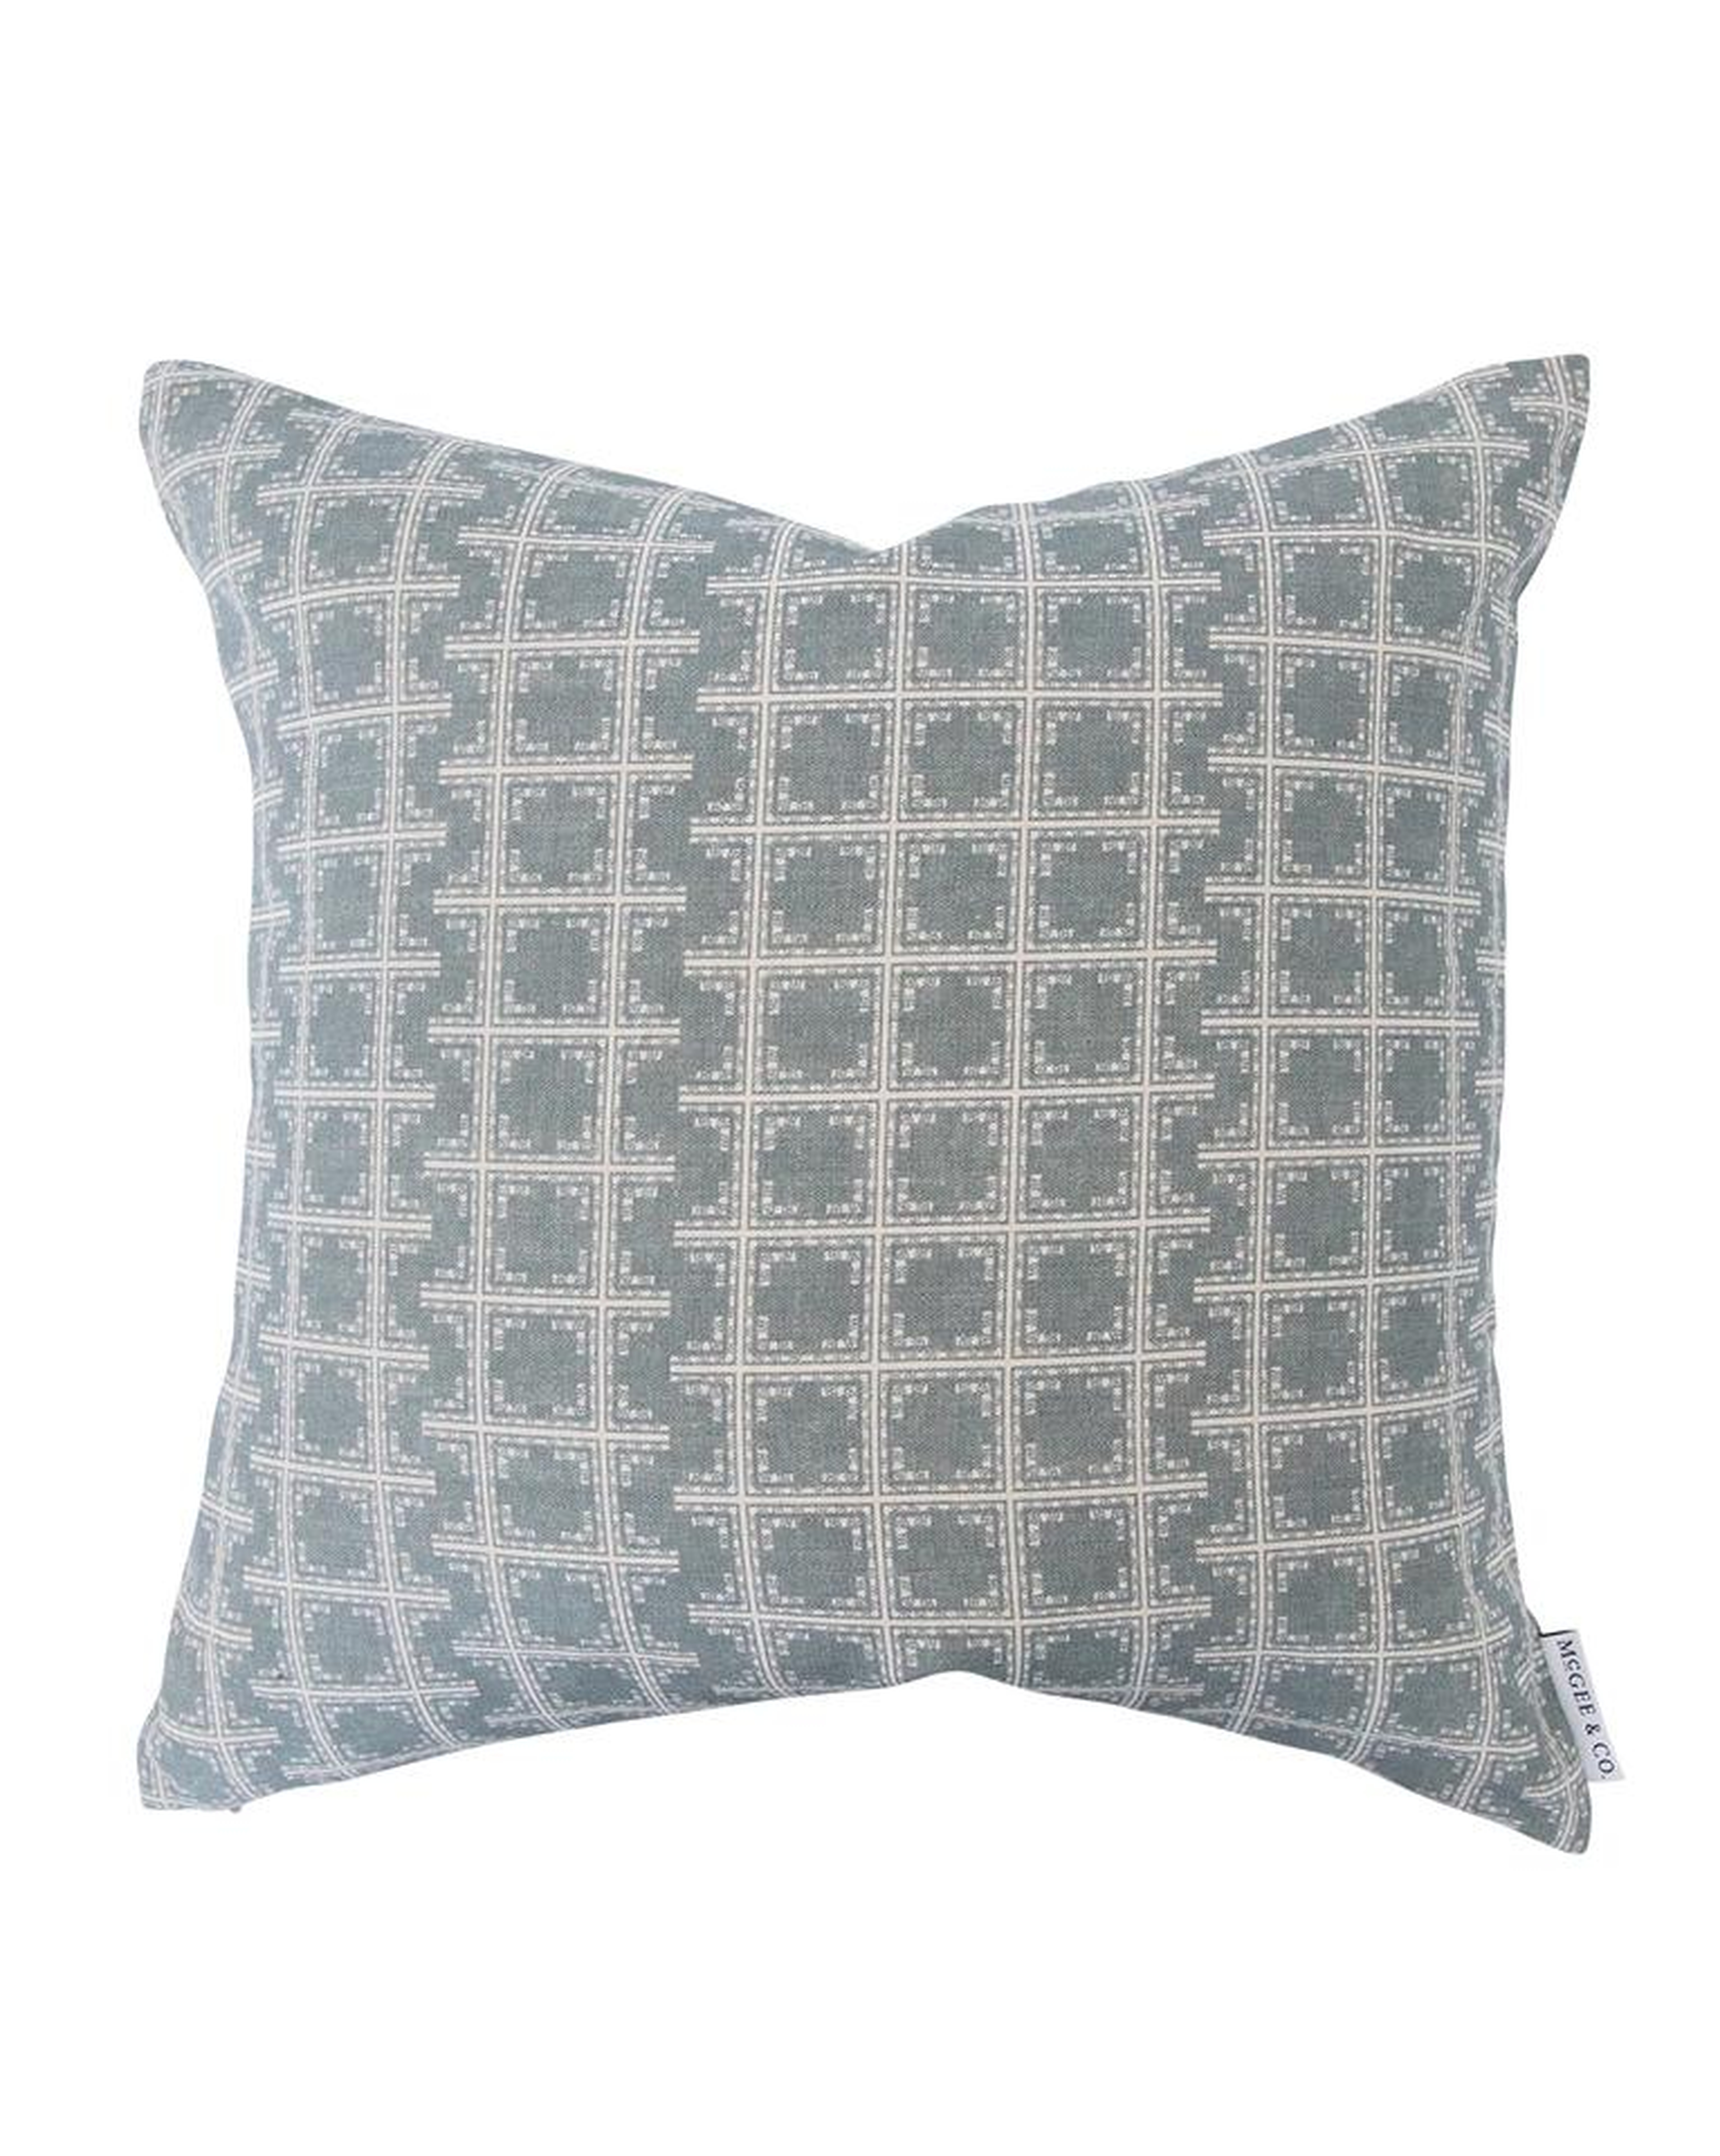 Fitz Pillow Cover, Blue Willow, 20" x 20" - McGee & Co.